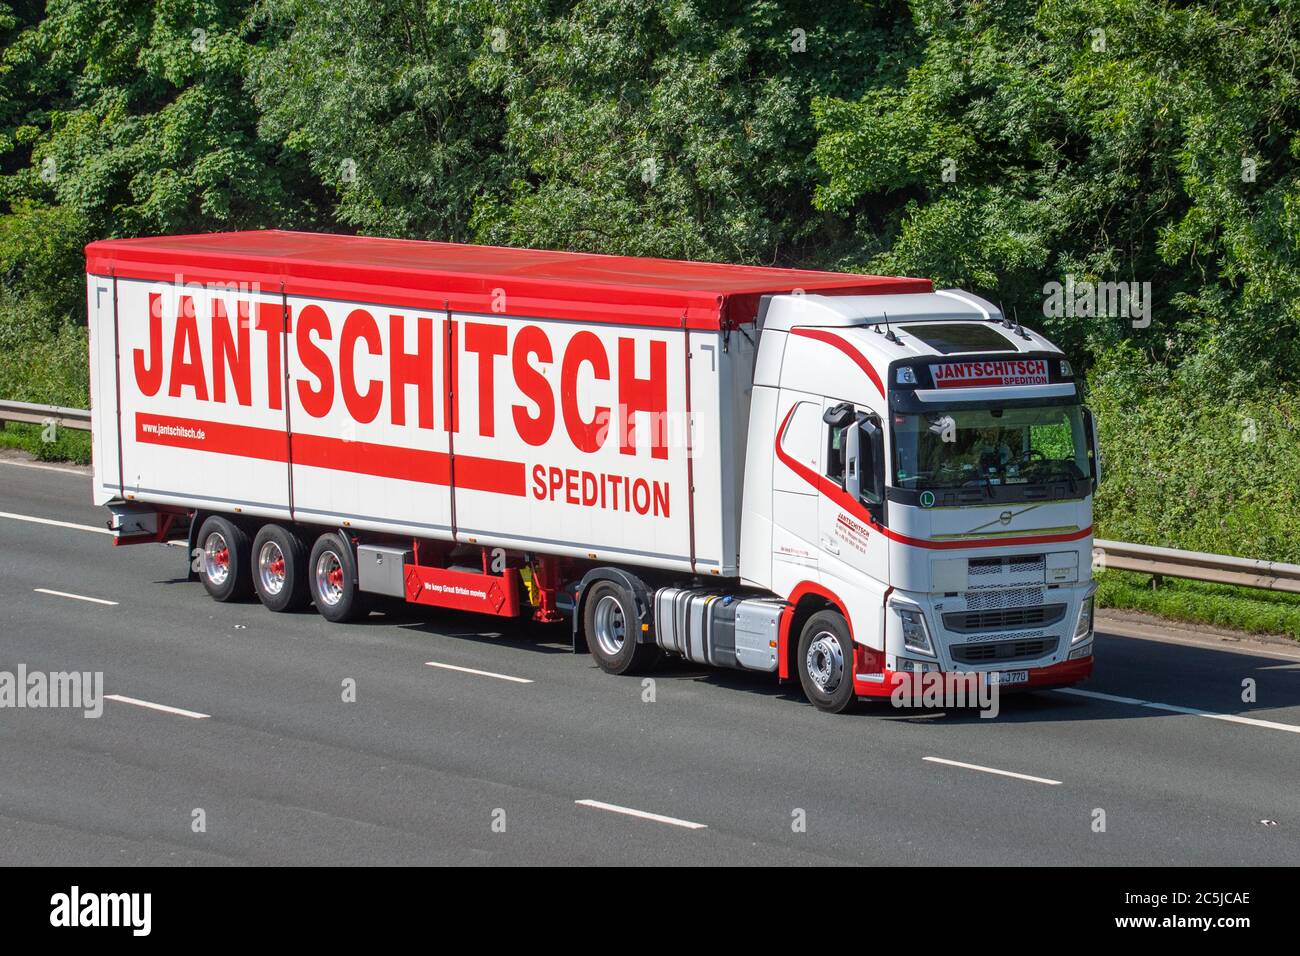 Jantschitsch spedition Haulage delivery trucks, lorry, transportation, articulated truck, cargo carrier, Volvo vehicle, European commercial transport industry HGV, M6 at Manchester, UK Stock Photo